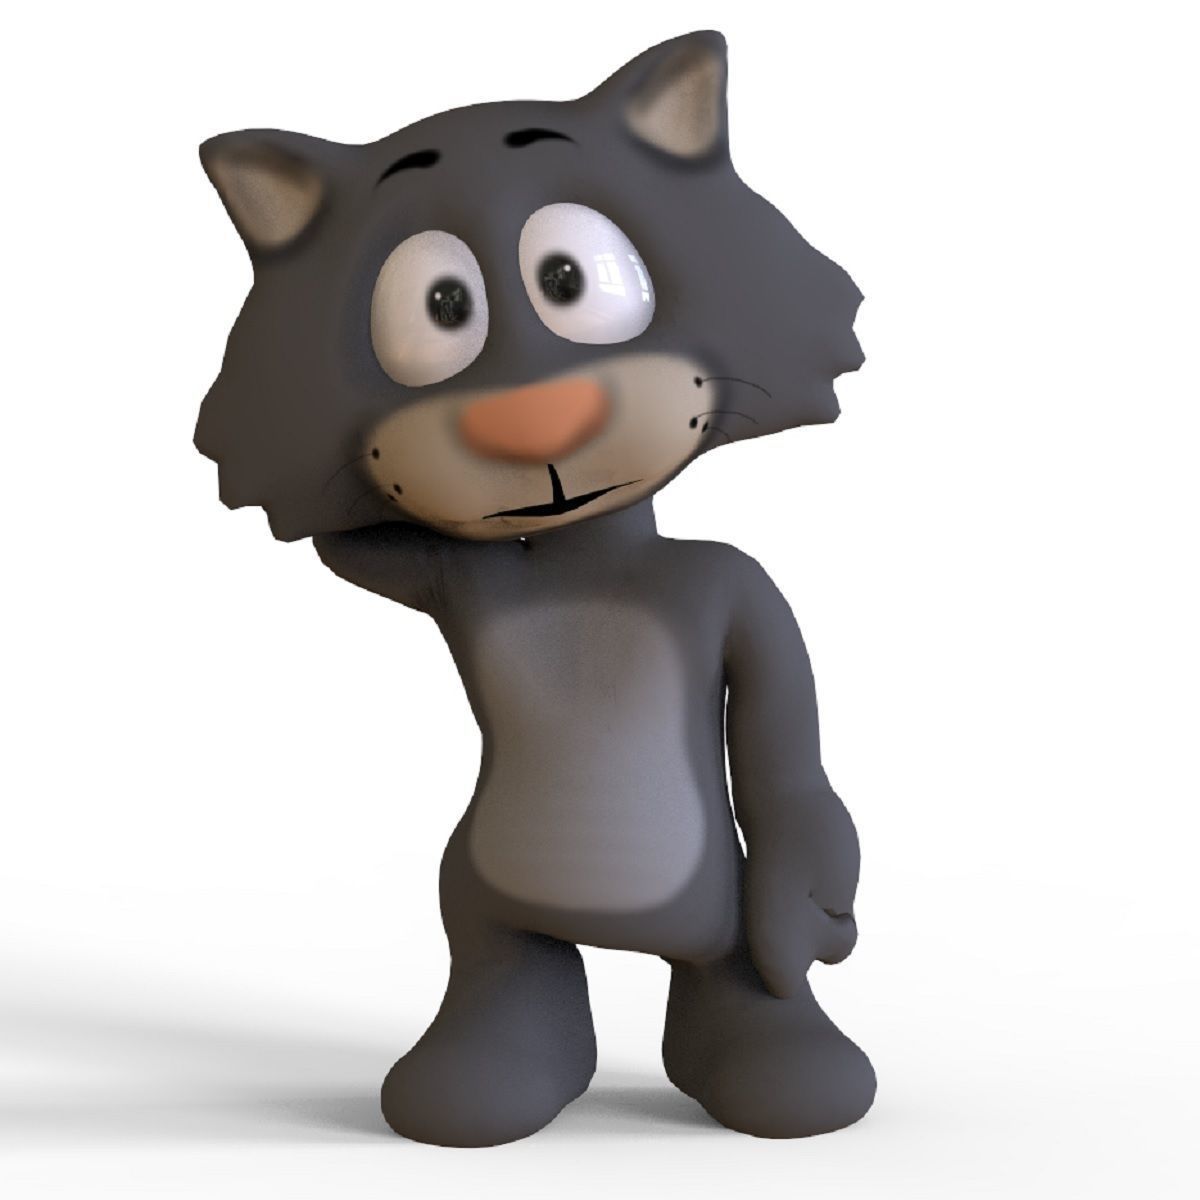 3D model Cat Cartoon VR / AR / lowpoly rigged animated